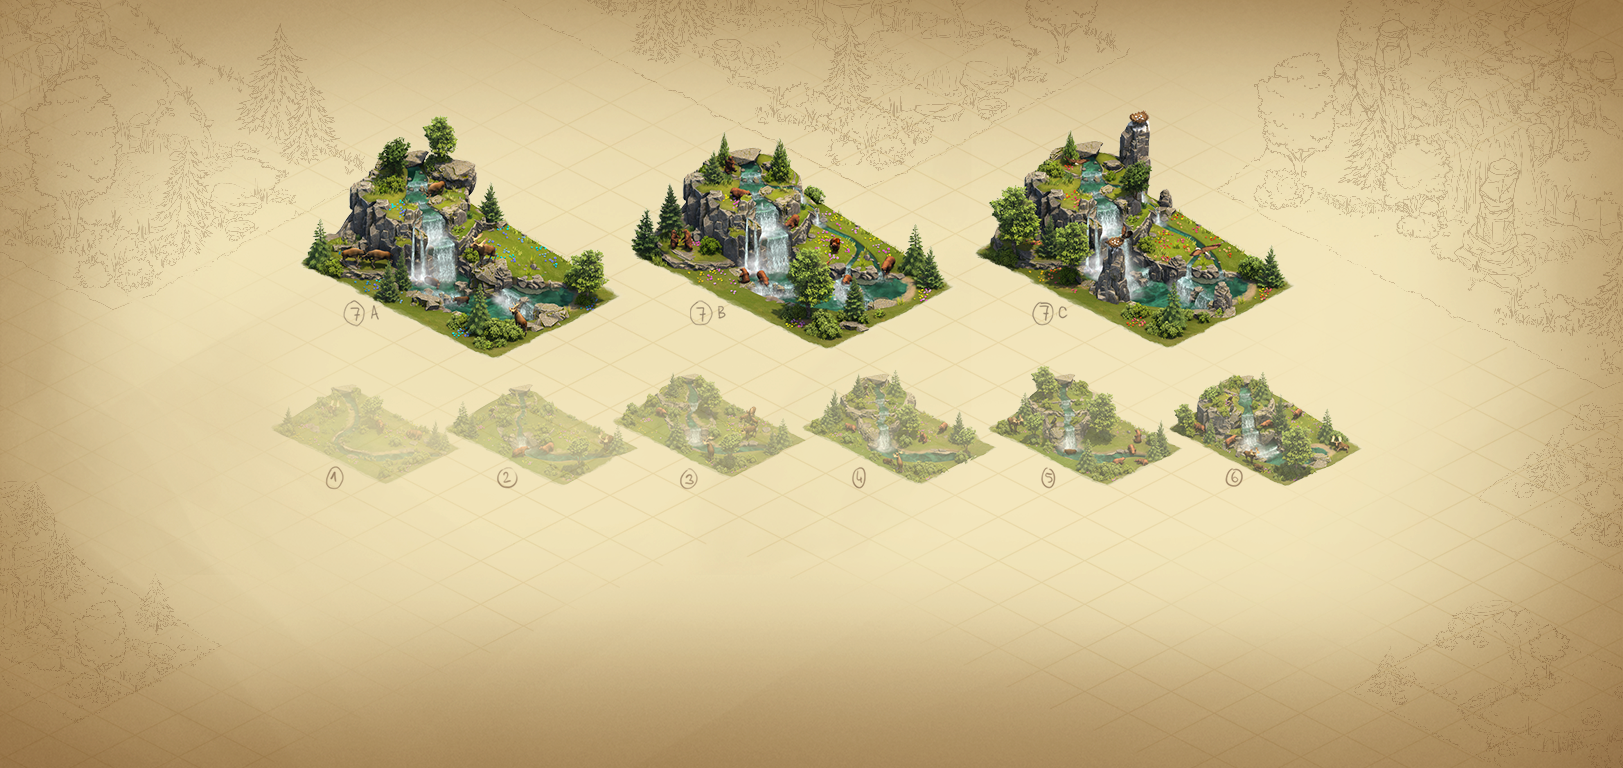 forge of empires winter event prizes